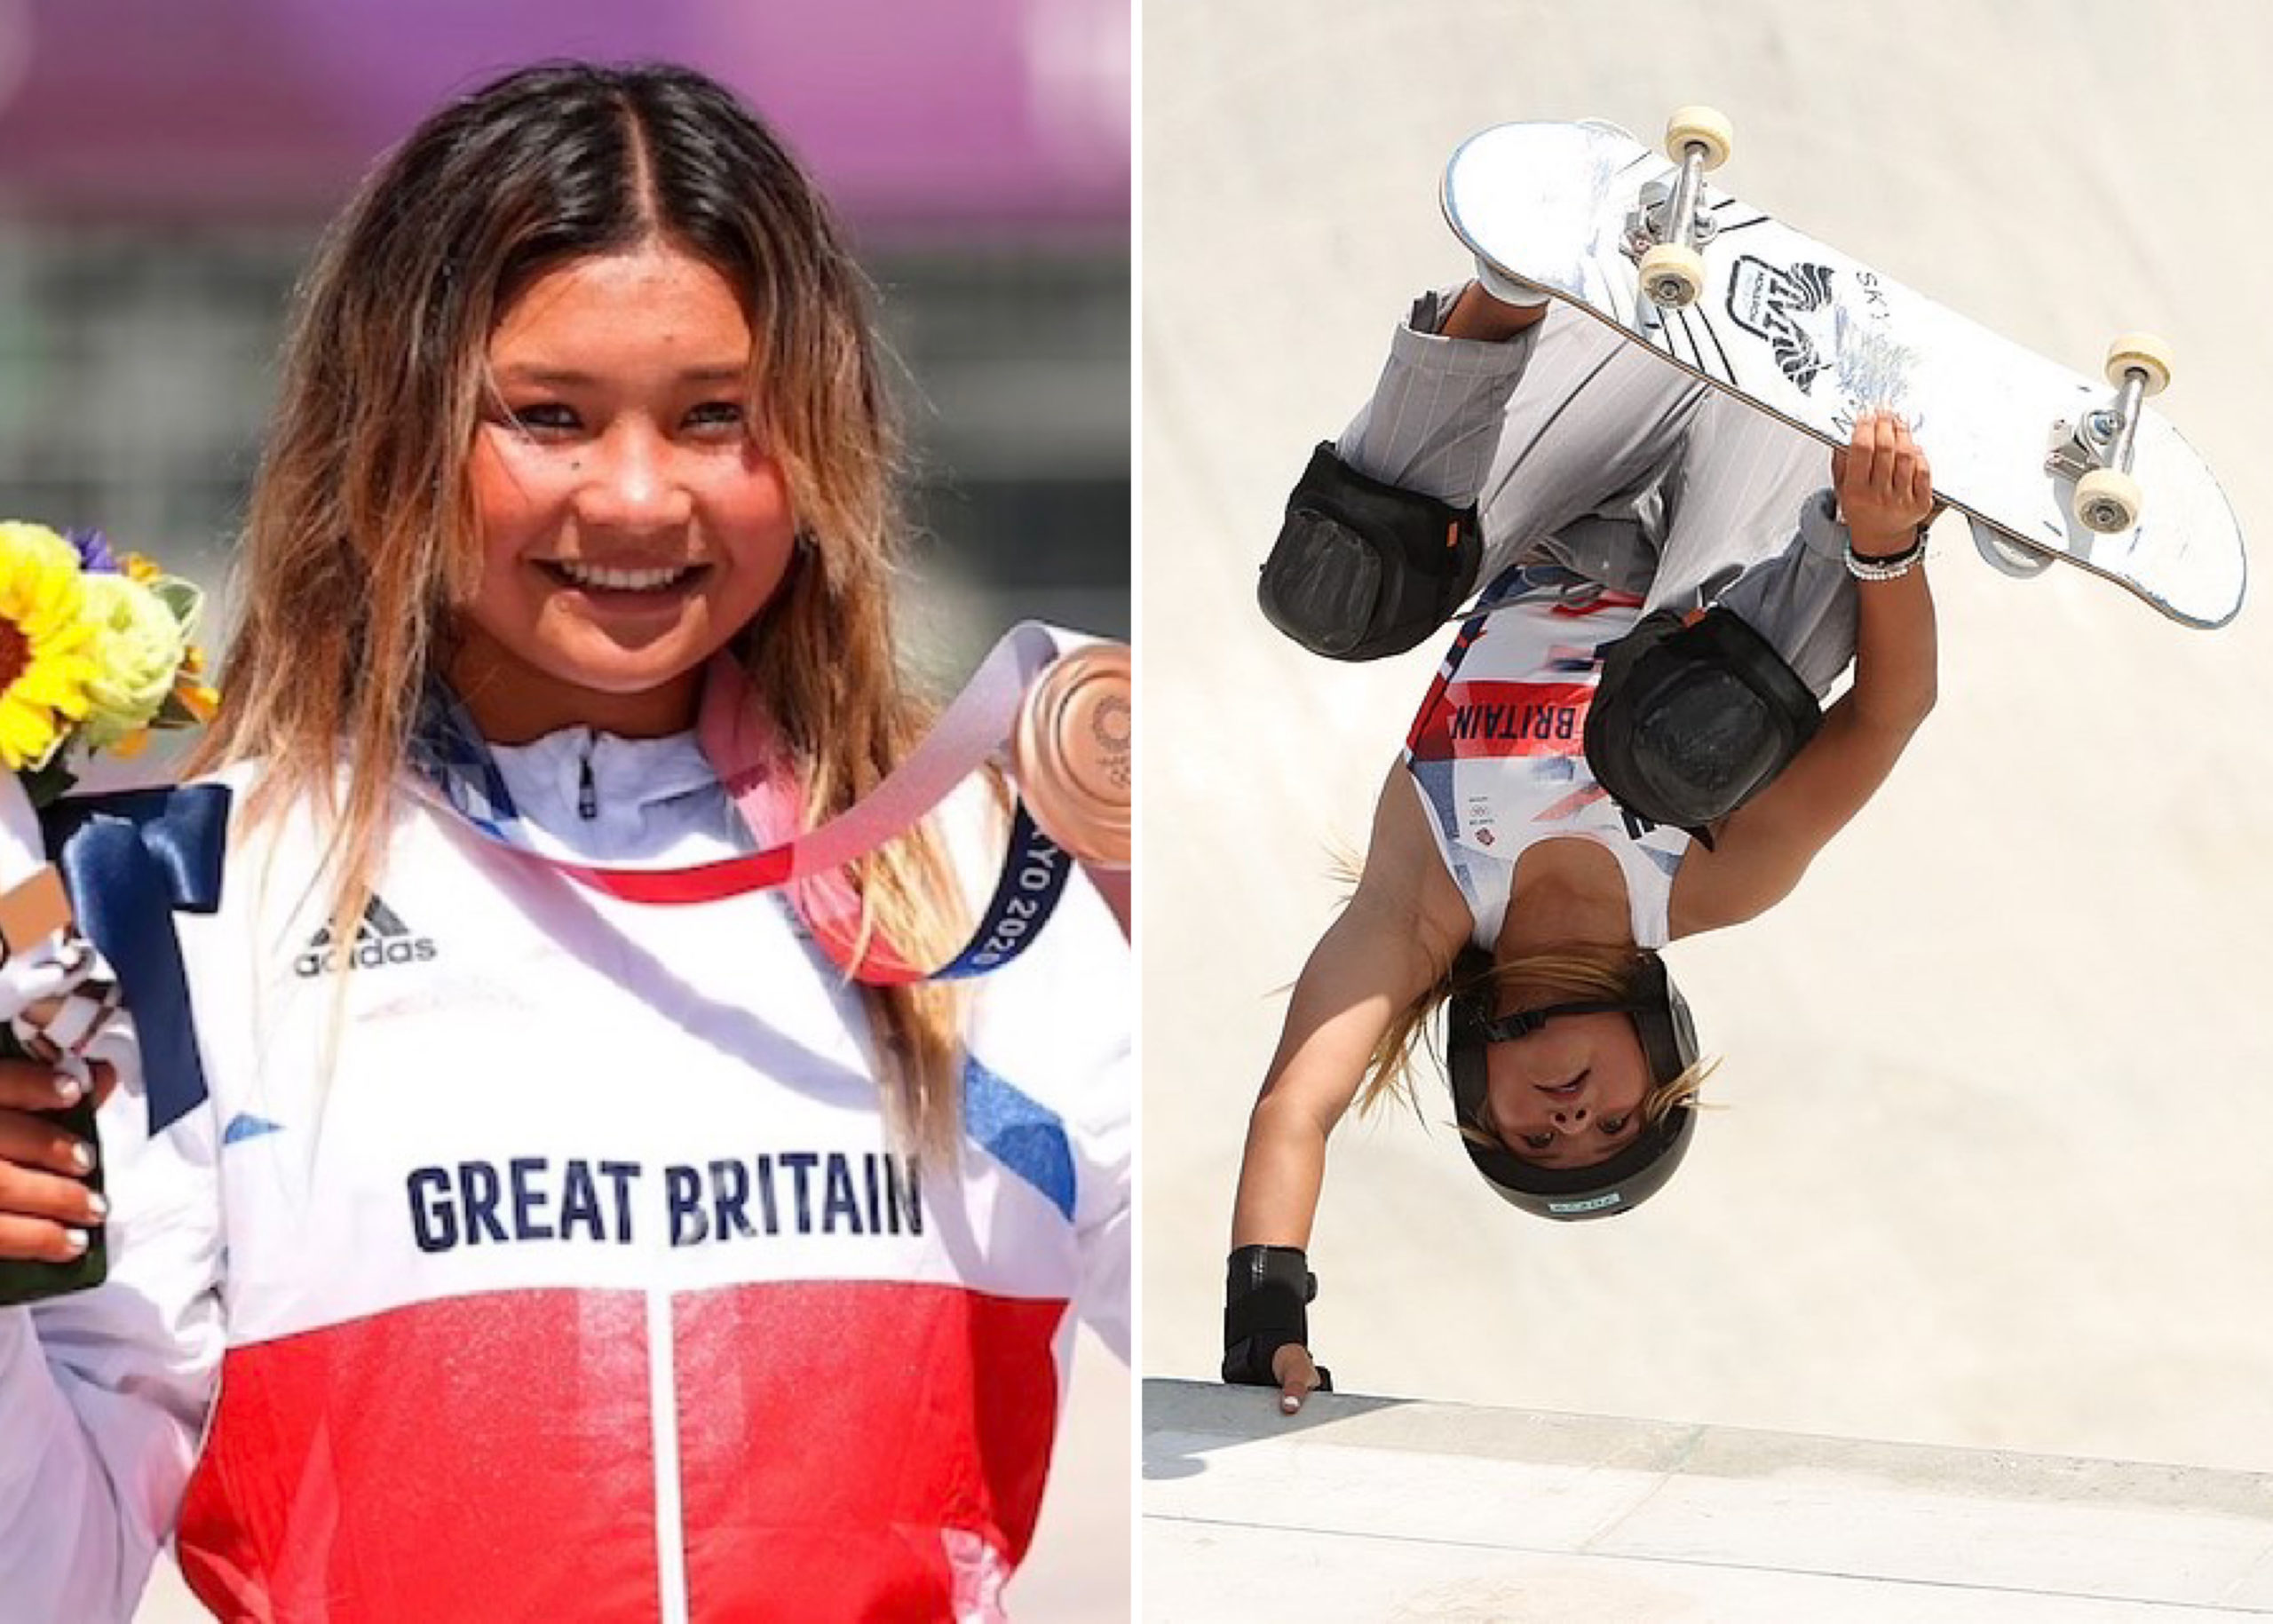 13-Year-Old Sky Brown Becomes Britain’s Youngest Olympic Medallist With Skateboard Bronze